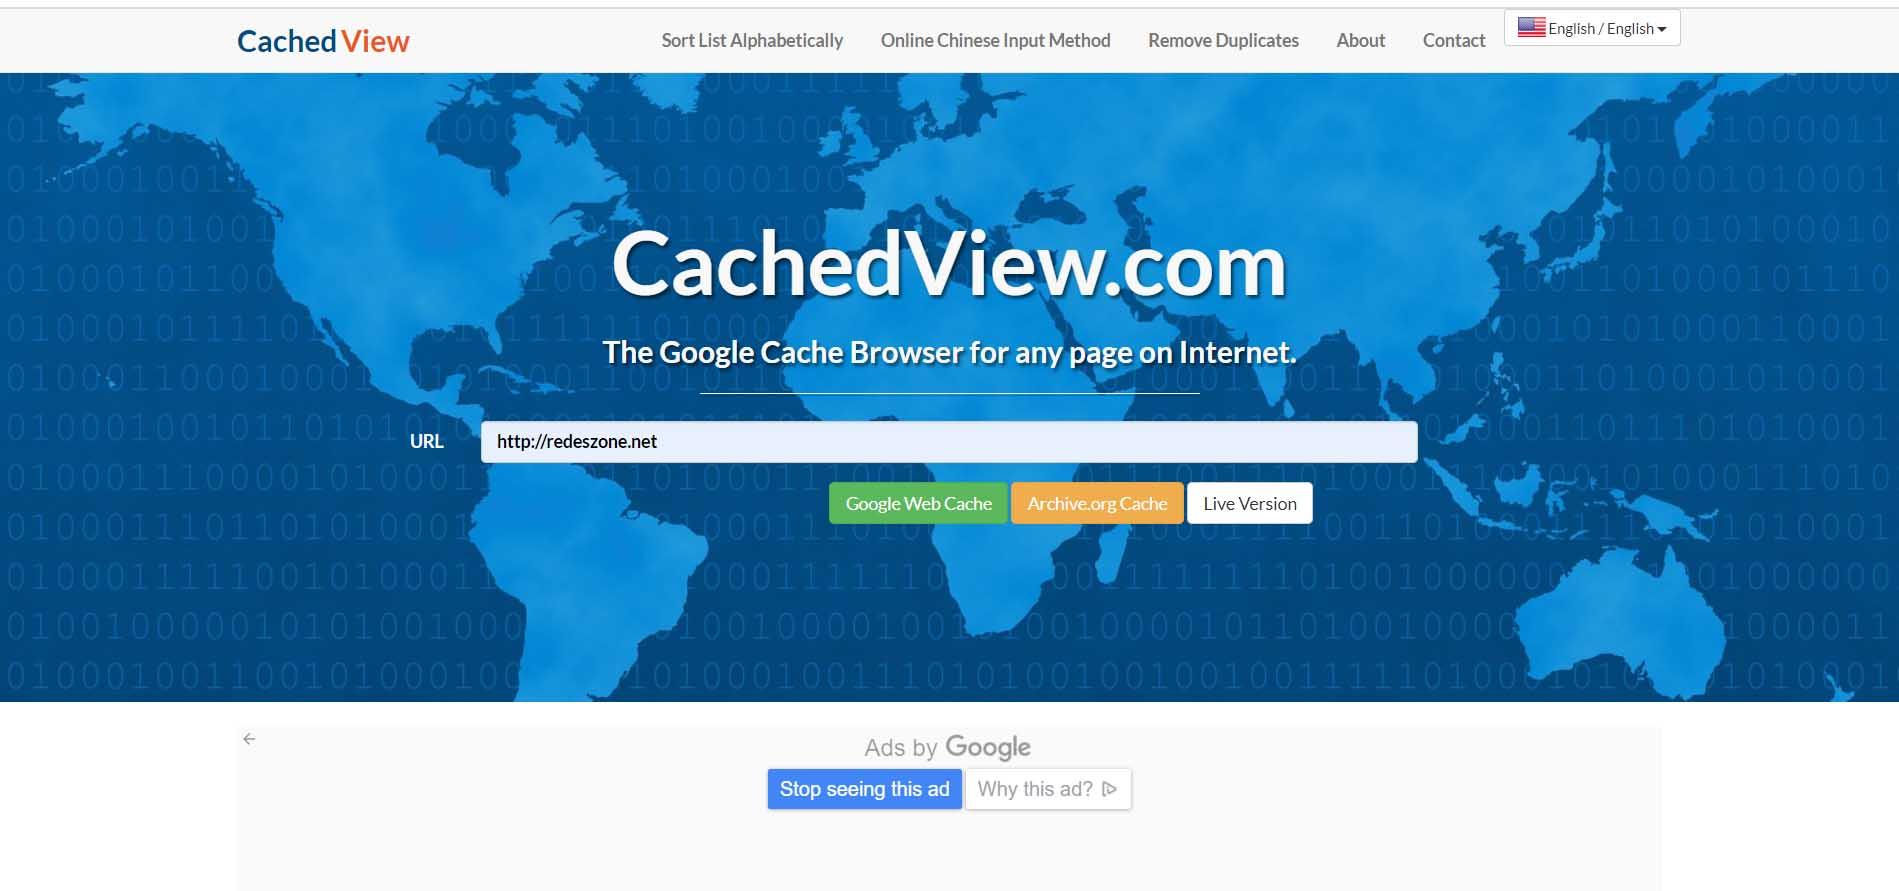 CachedView